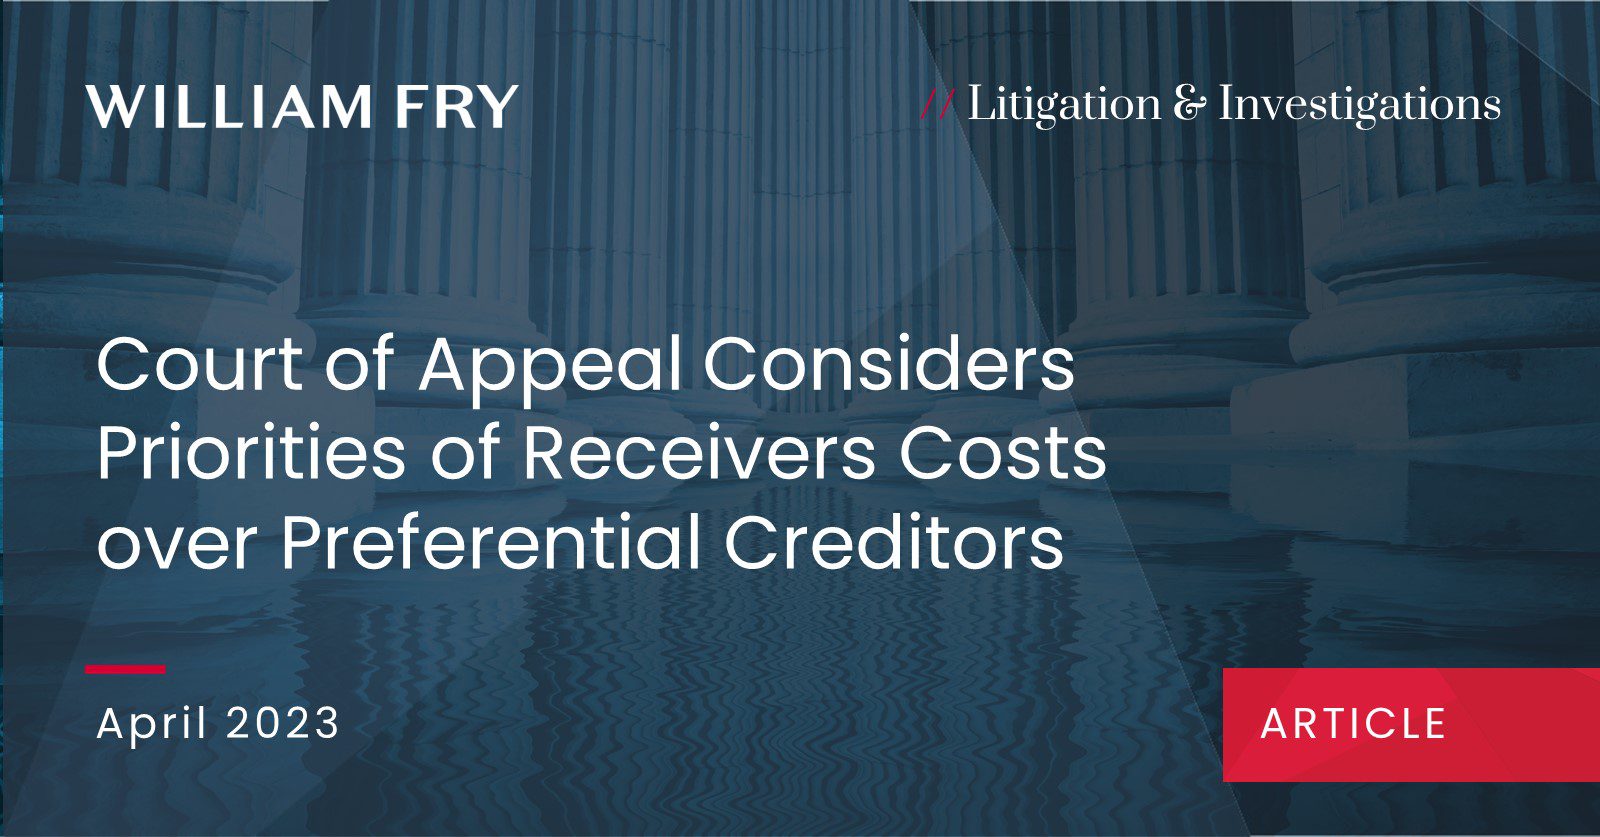 Court of Appeal Considers Priorities of Receivers Costs over Preferential Creditors